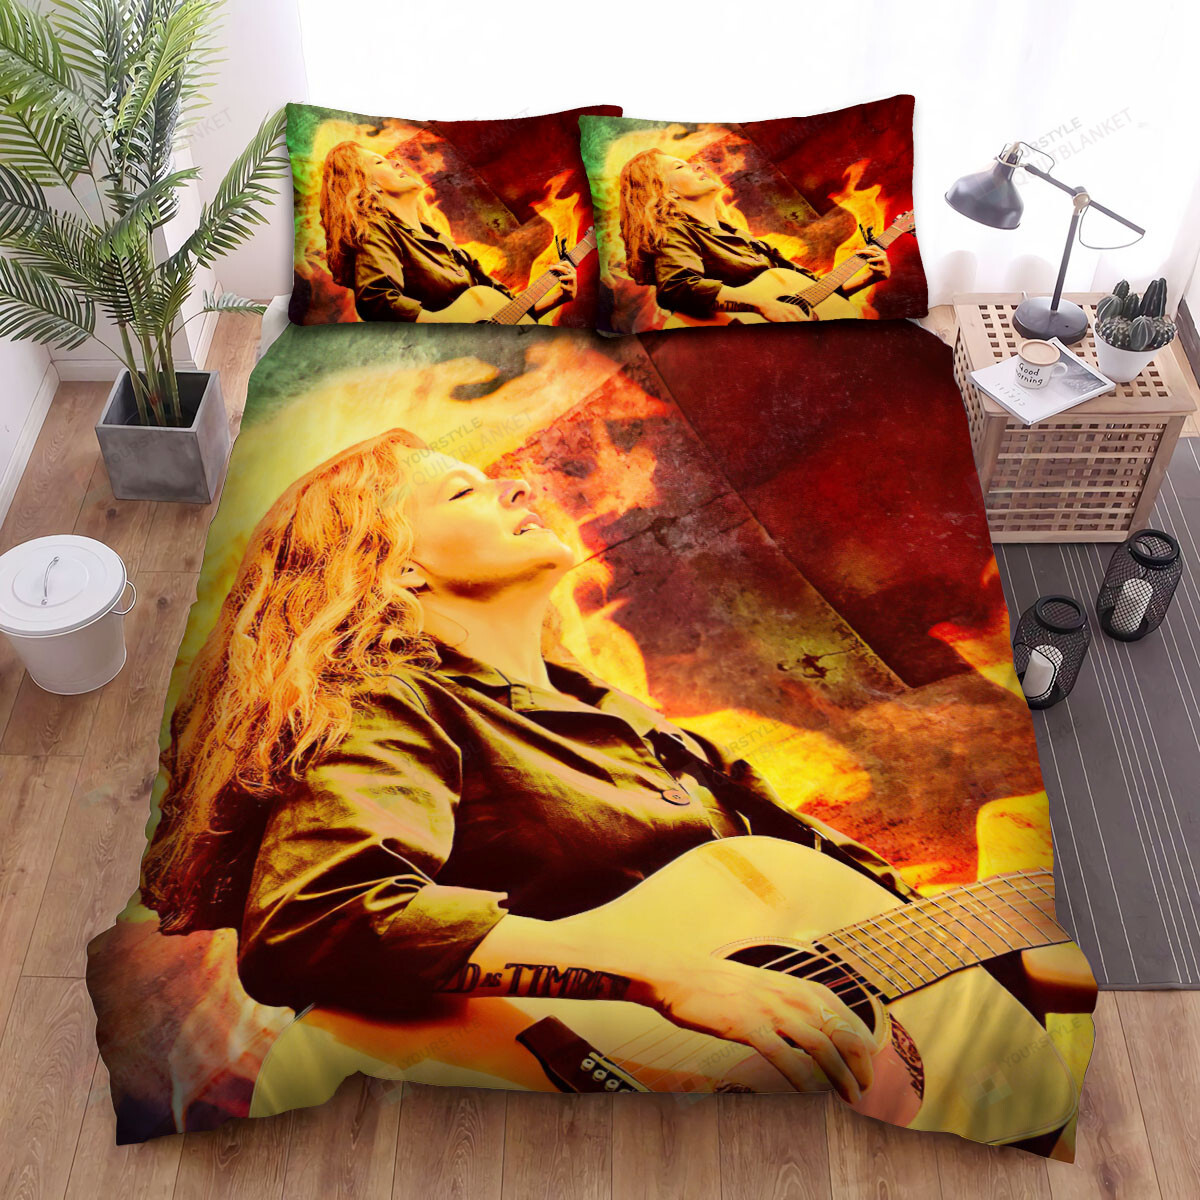 Neko Case With The Guitar Bed Sheets Spread Comforter Duvet Cover Bedding Sets